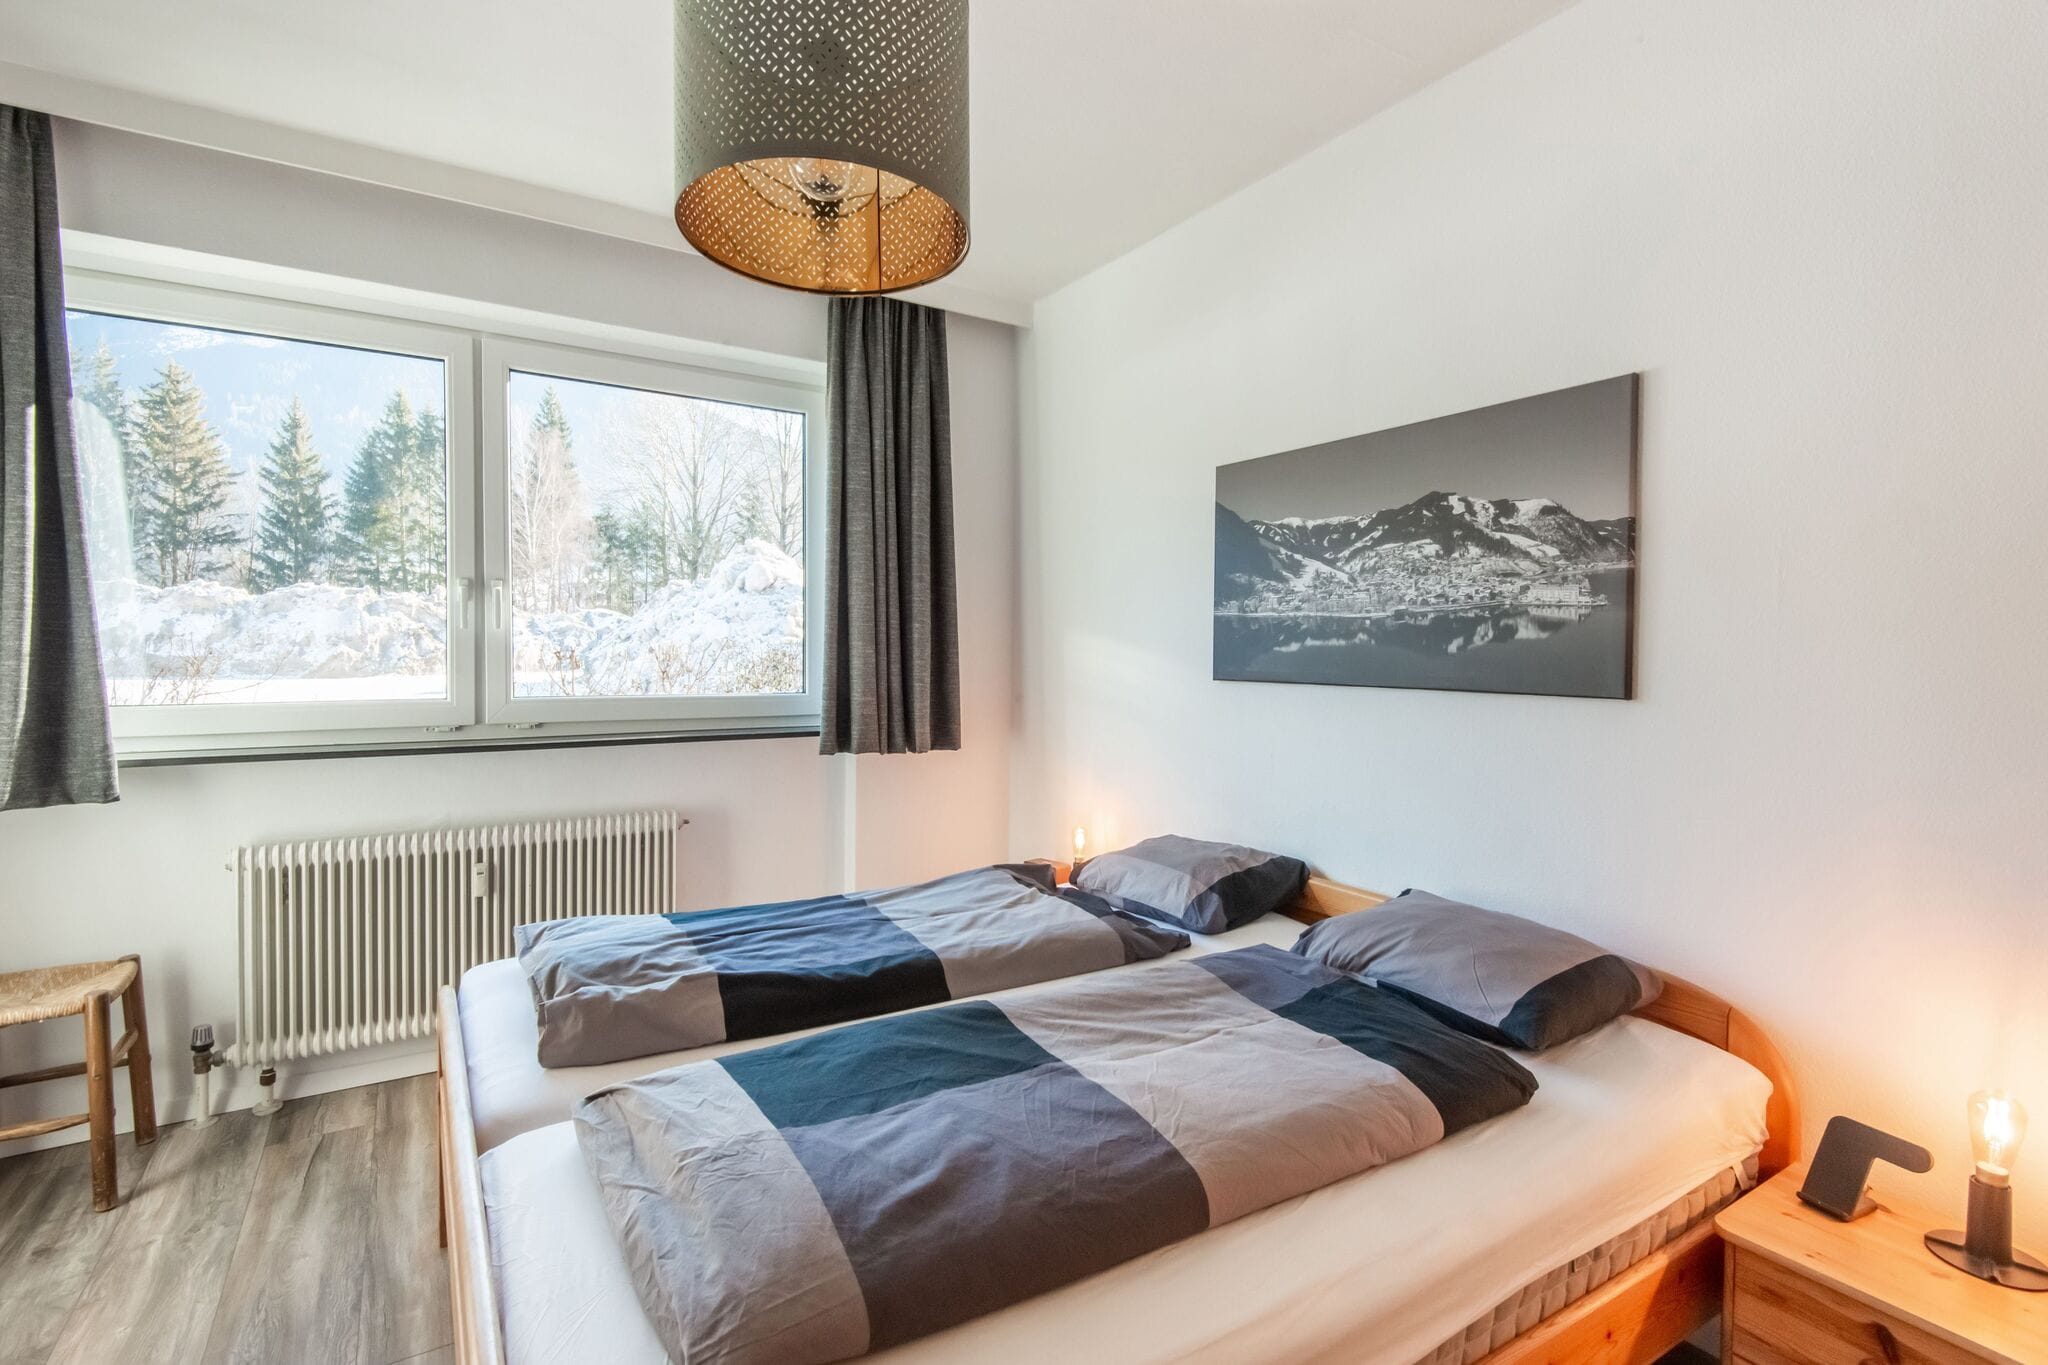 Appartement in Zell am See nahe Skigebiet